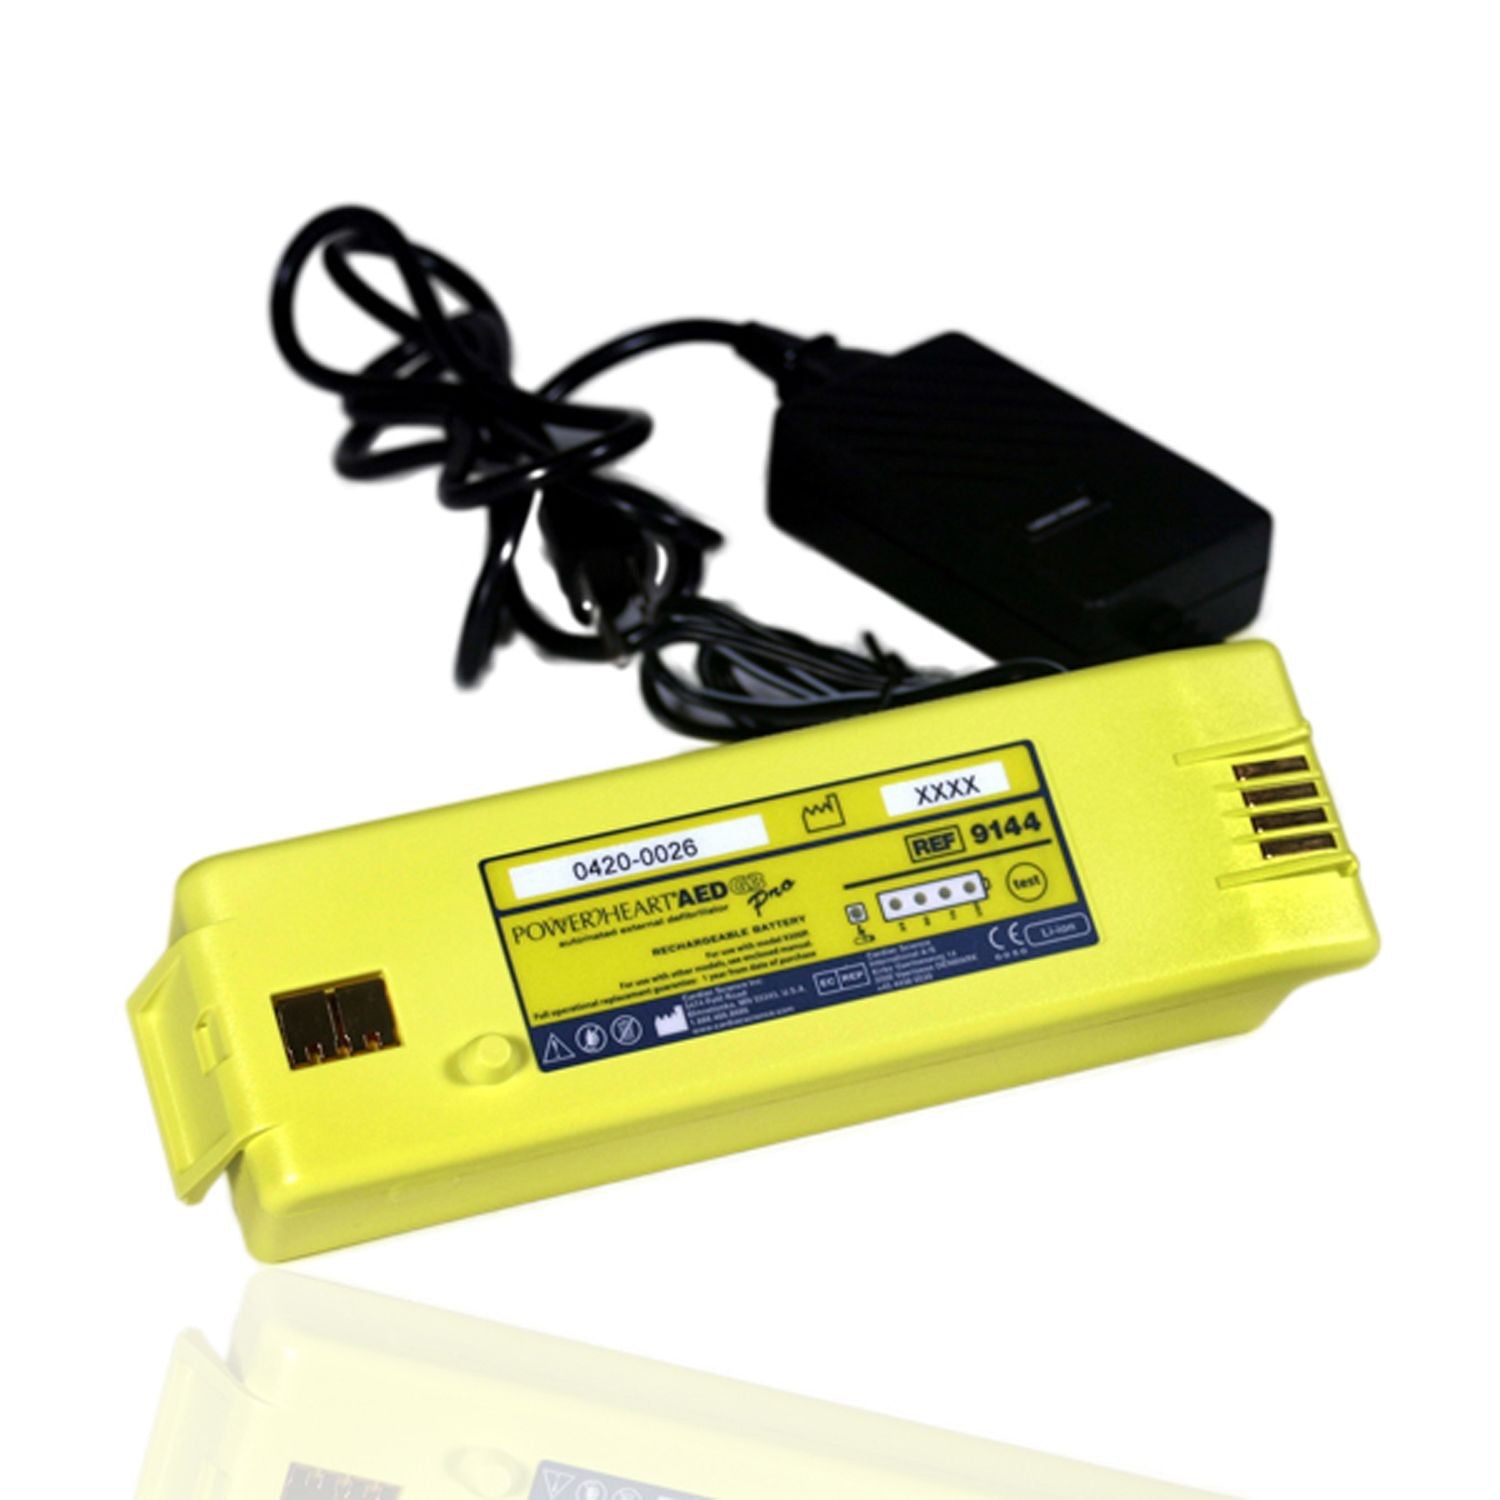 Powerheart G3 AED | Battery | Yellow | IntelliSense Lithium Battery with 4 year 'unconditional' warranty